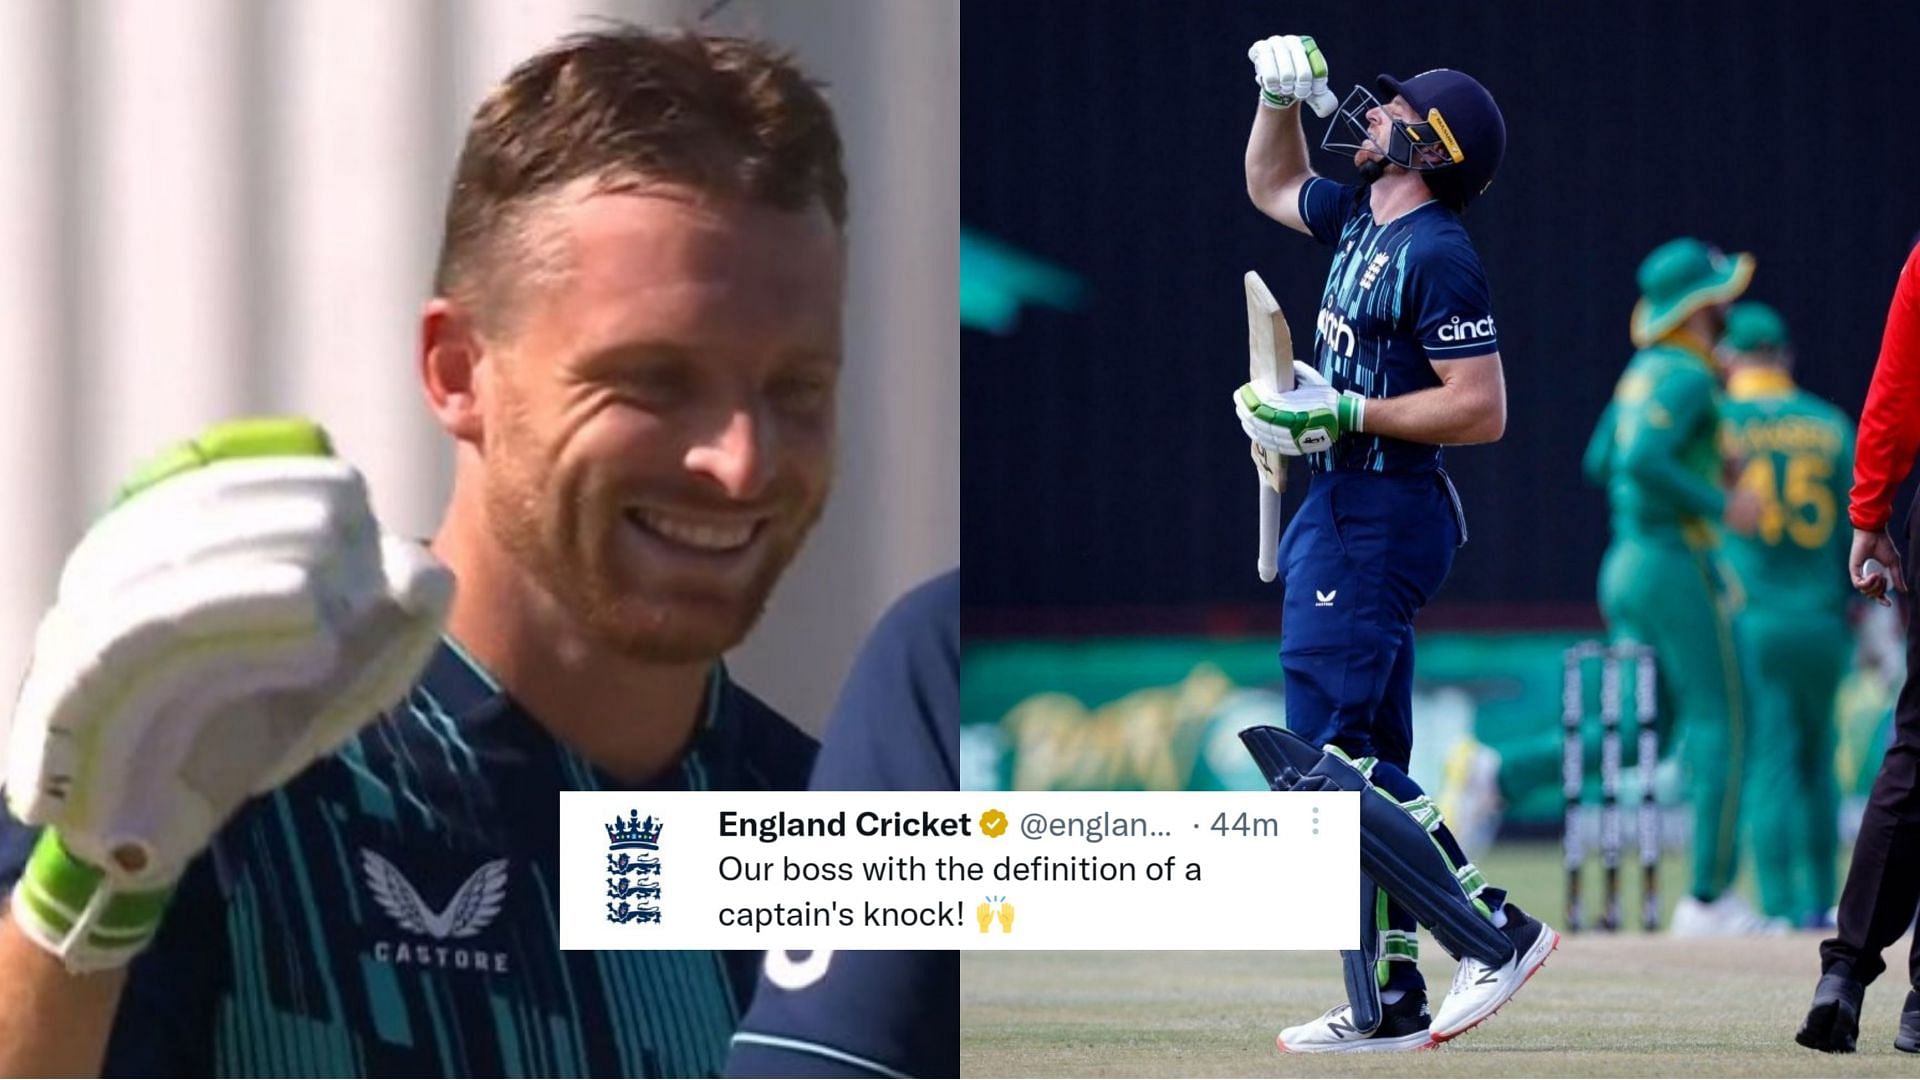 Jos Buttler scored his 2nd ODI century vs. South Africa (Image: Twitter)